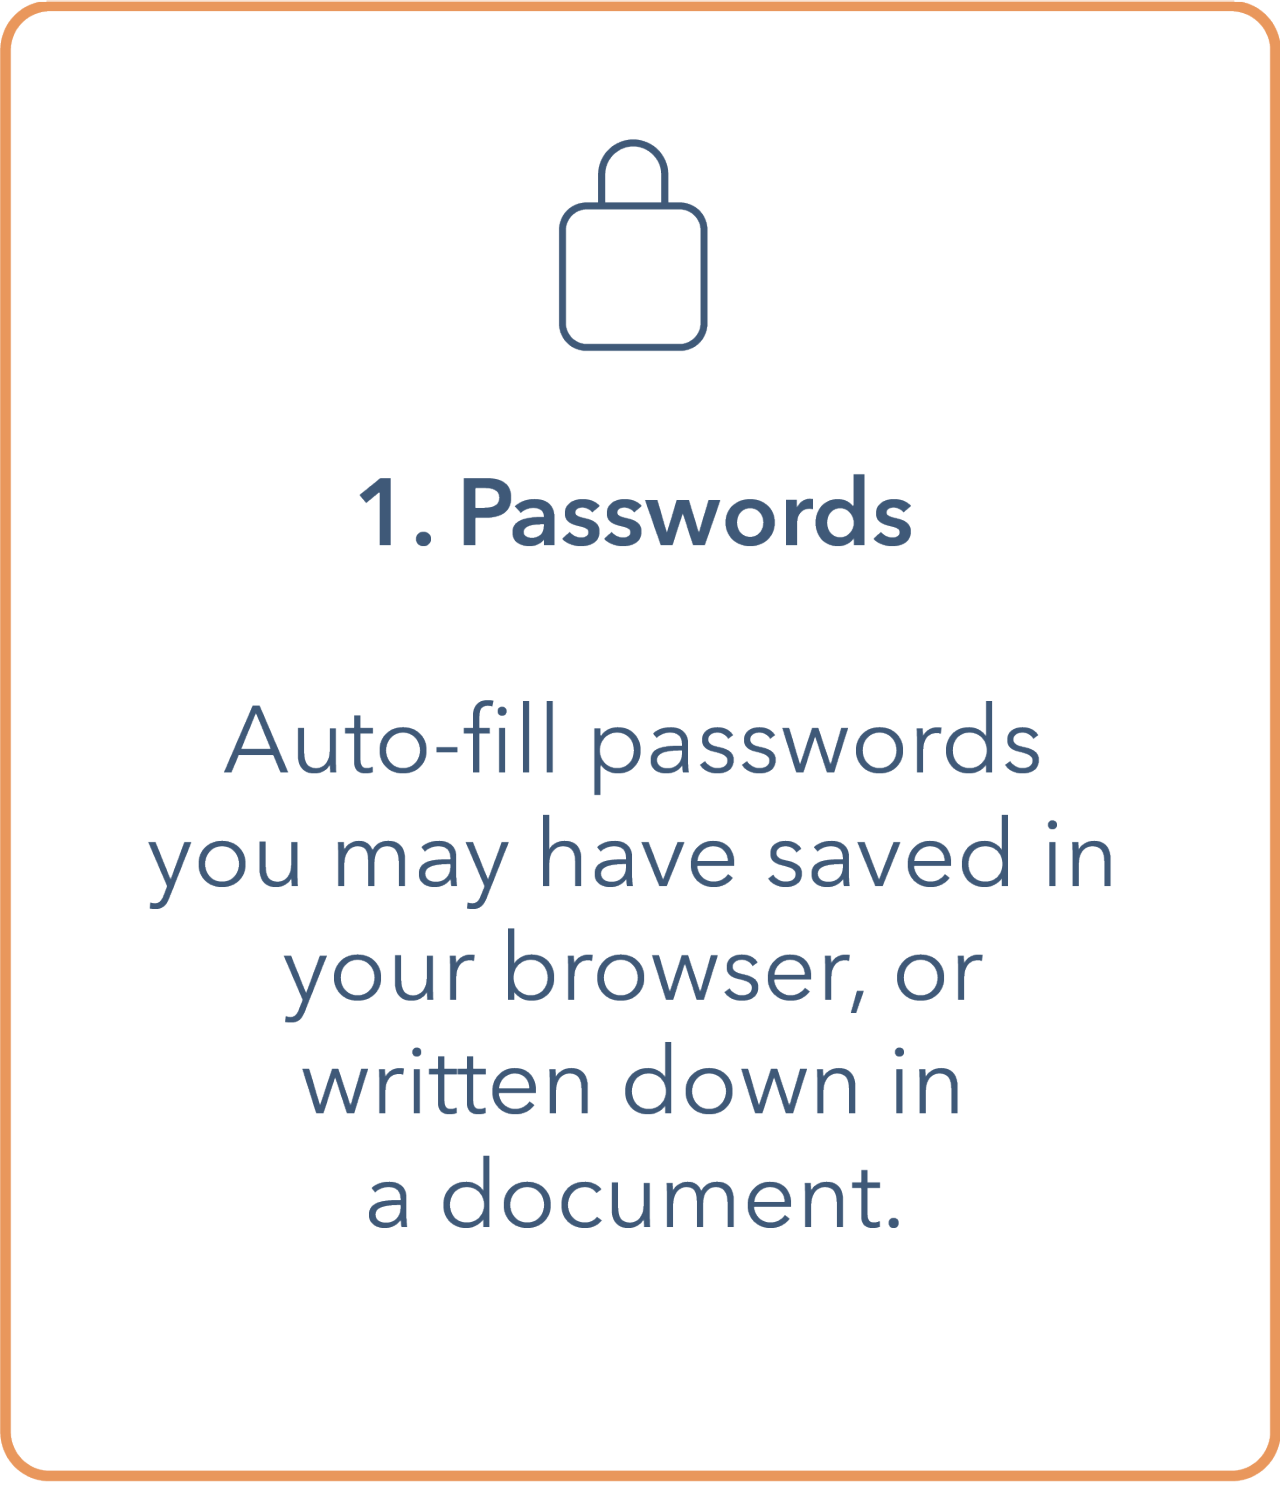 Image shows a tile with an outline of a padlock at the top. Underneath a bullet point contains  '1. Passwords'. The main body contains 'auto-fill passwords you may have saved in your browser, or written down in a document.' Tile has an orange outline border and text is in dark blue.